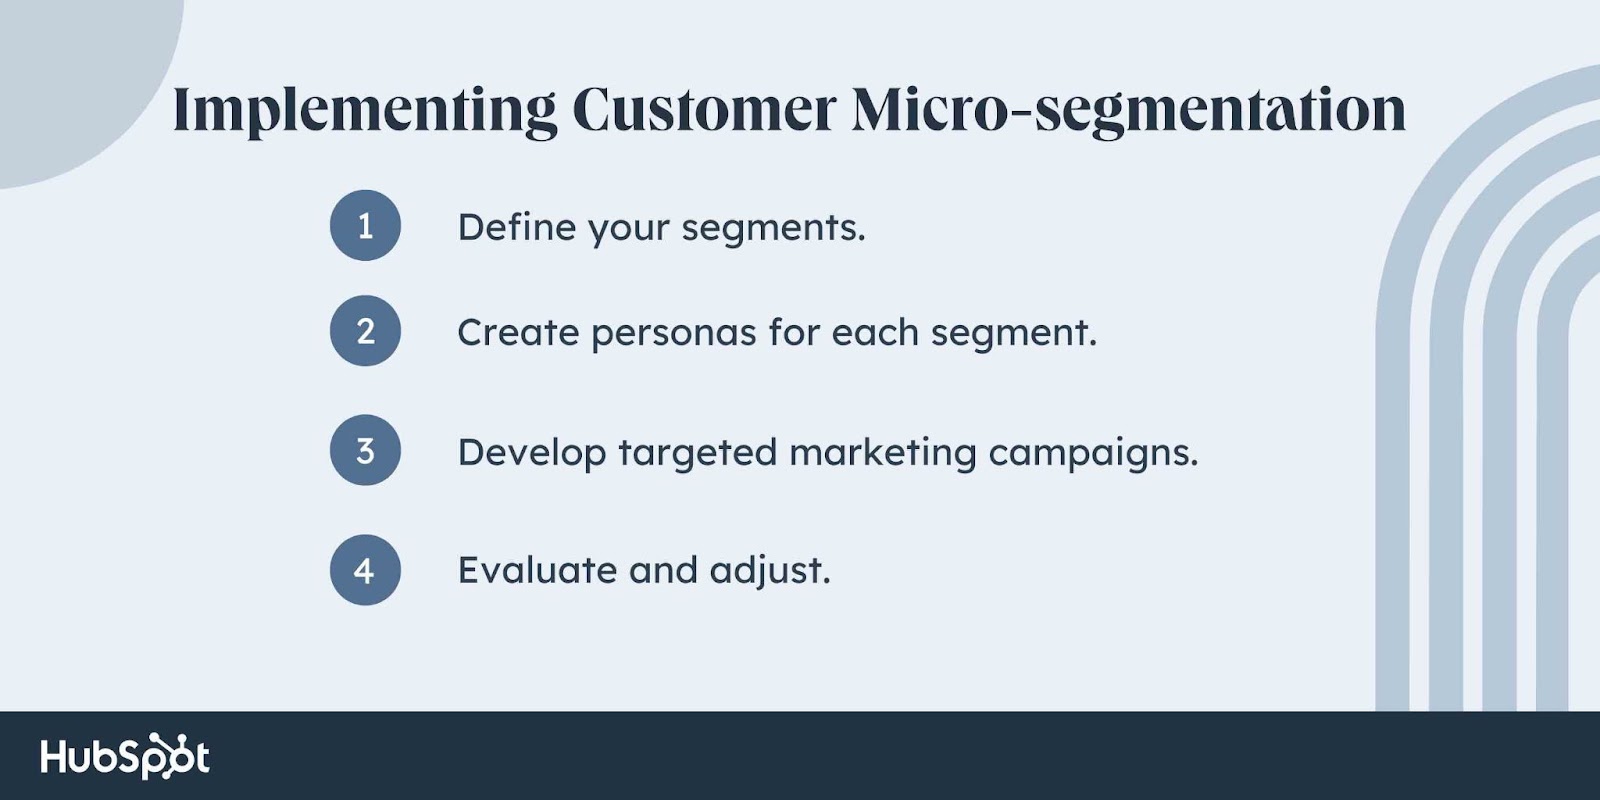 customer micro-segmentation implementation; 1. Define your segments; 2. Create personas for each segment; 3. Develop target marketing campaigns; 4. Evaluate and adjust. 